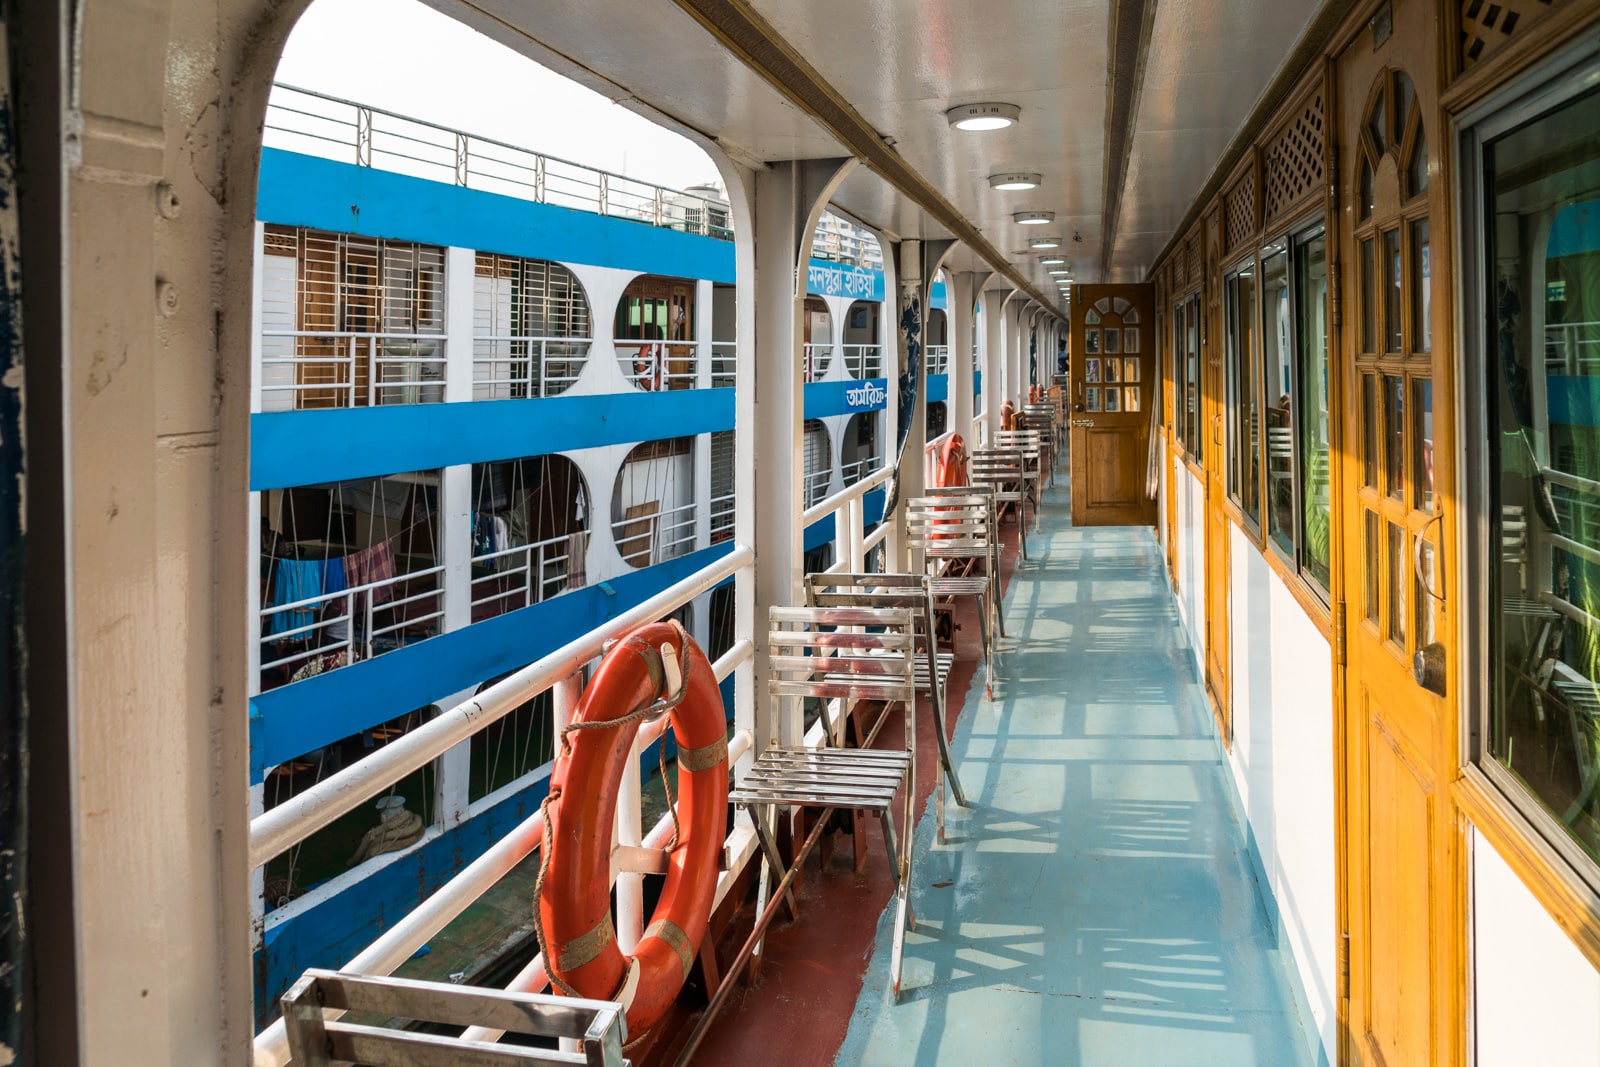 Guide to launches in Bangladesh - Cabin class area of launch boat - Lost With Purpose travel blog